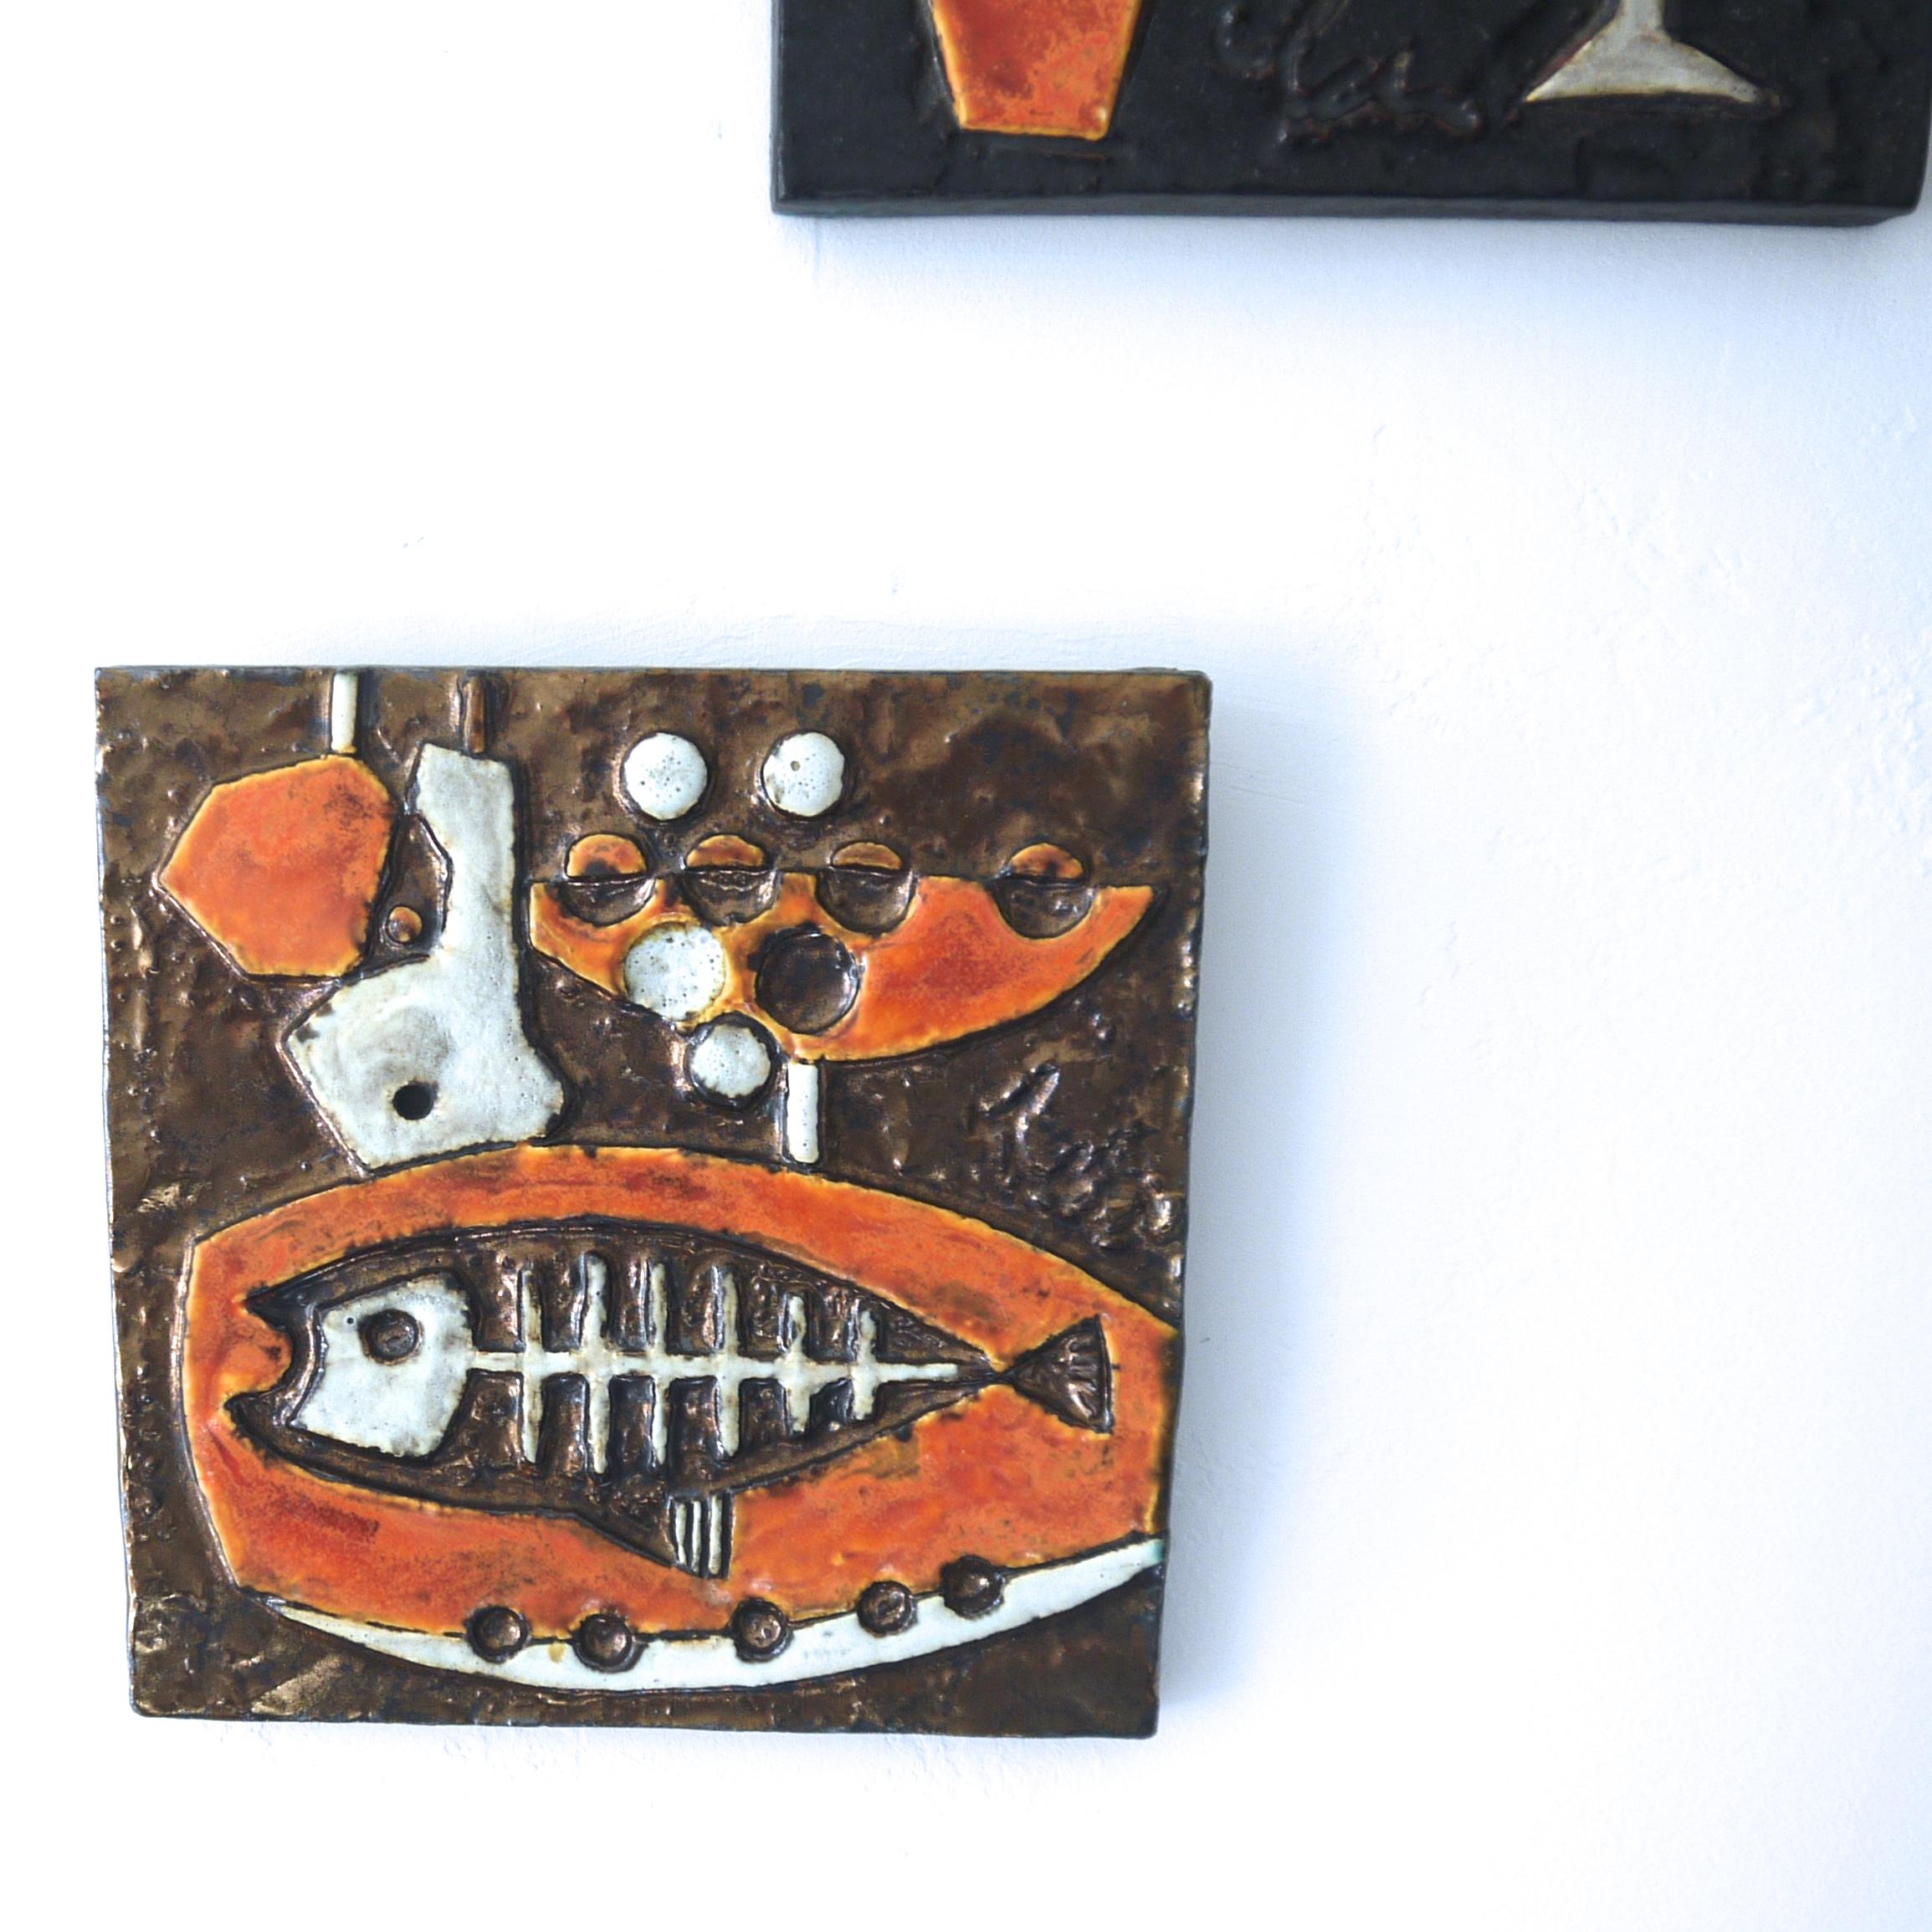 German Modernist Ceramic Wall Plaques, Set of Three by Helmut Schaffenacker Late 1950s For Sale